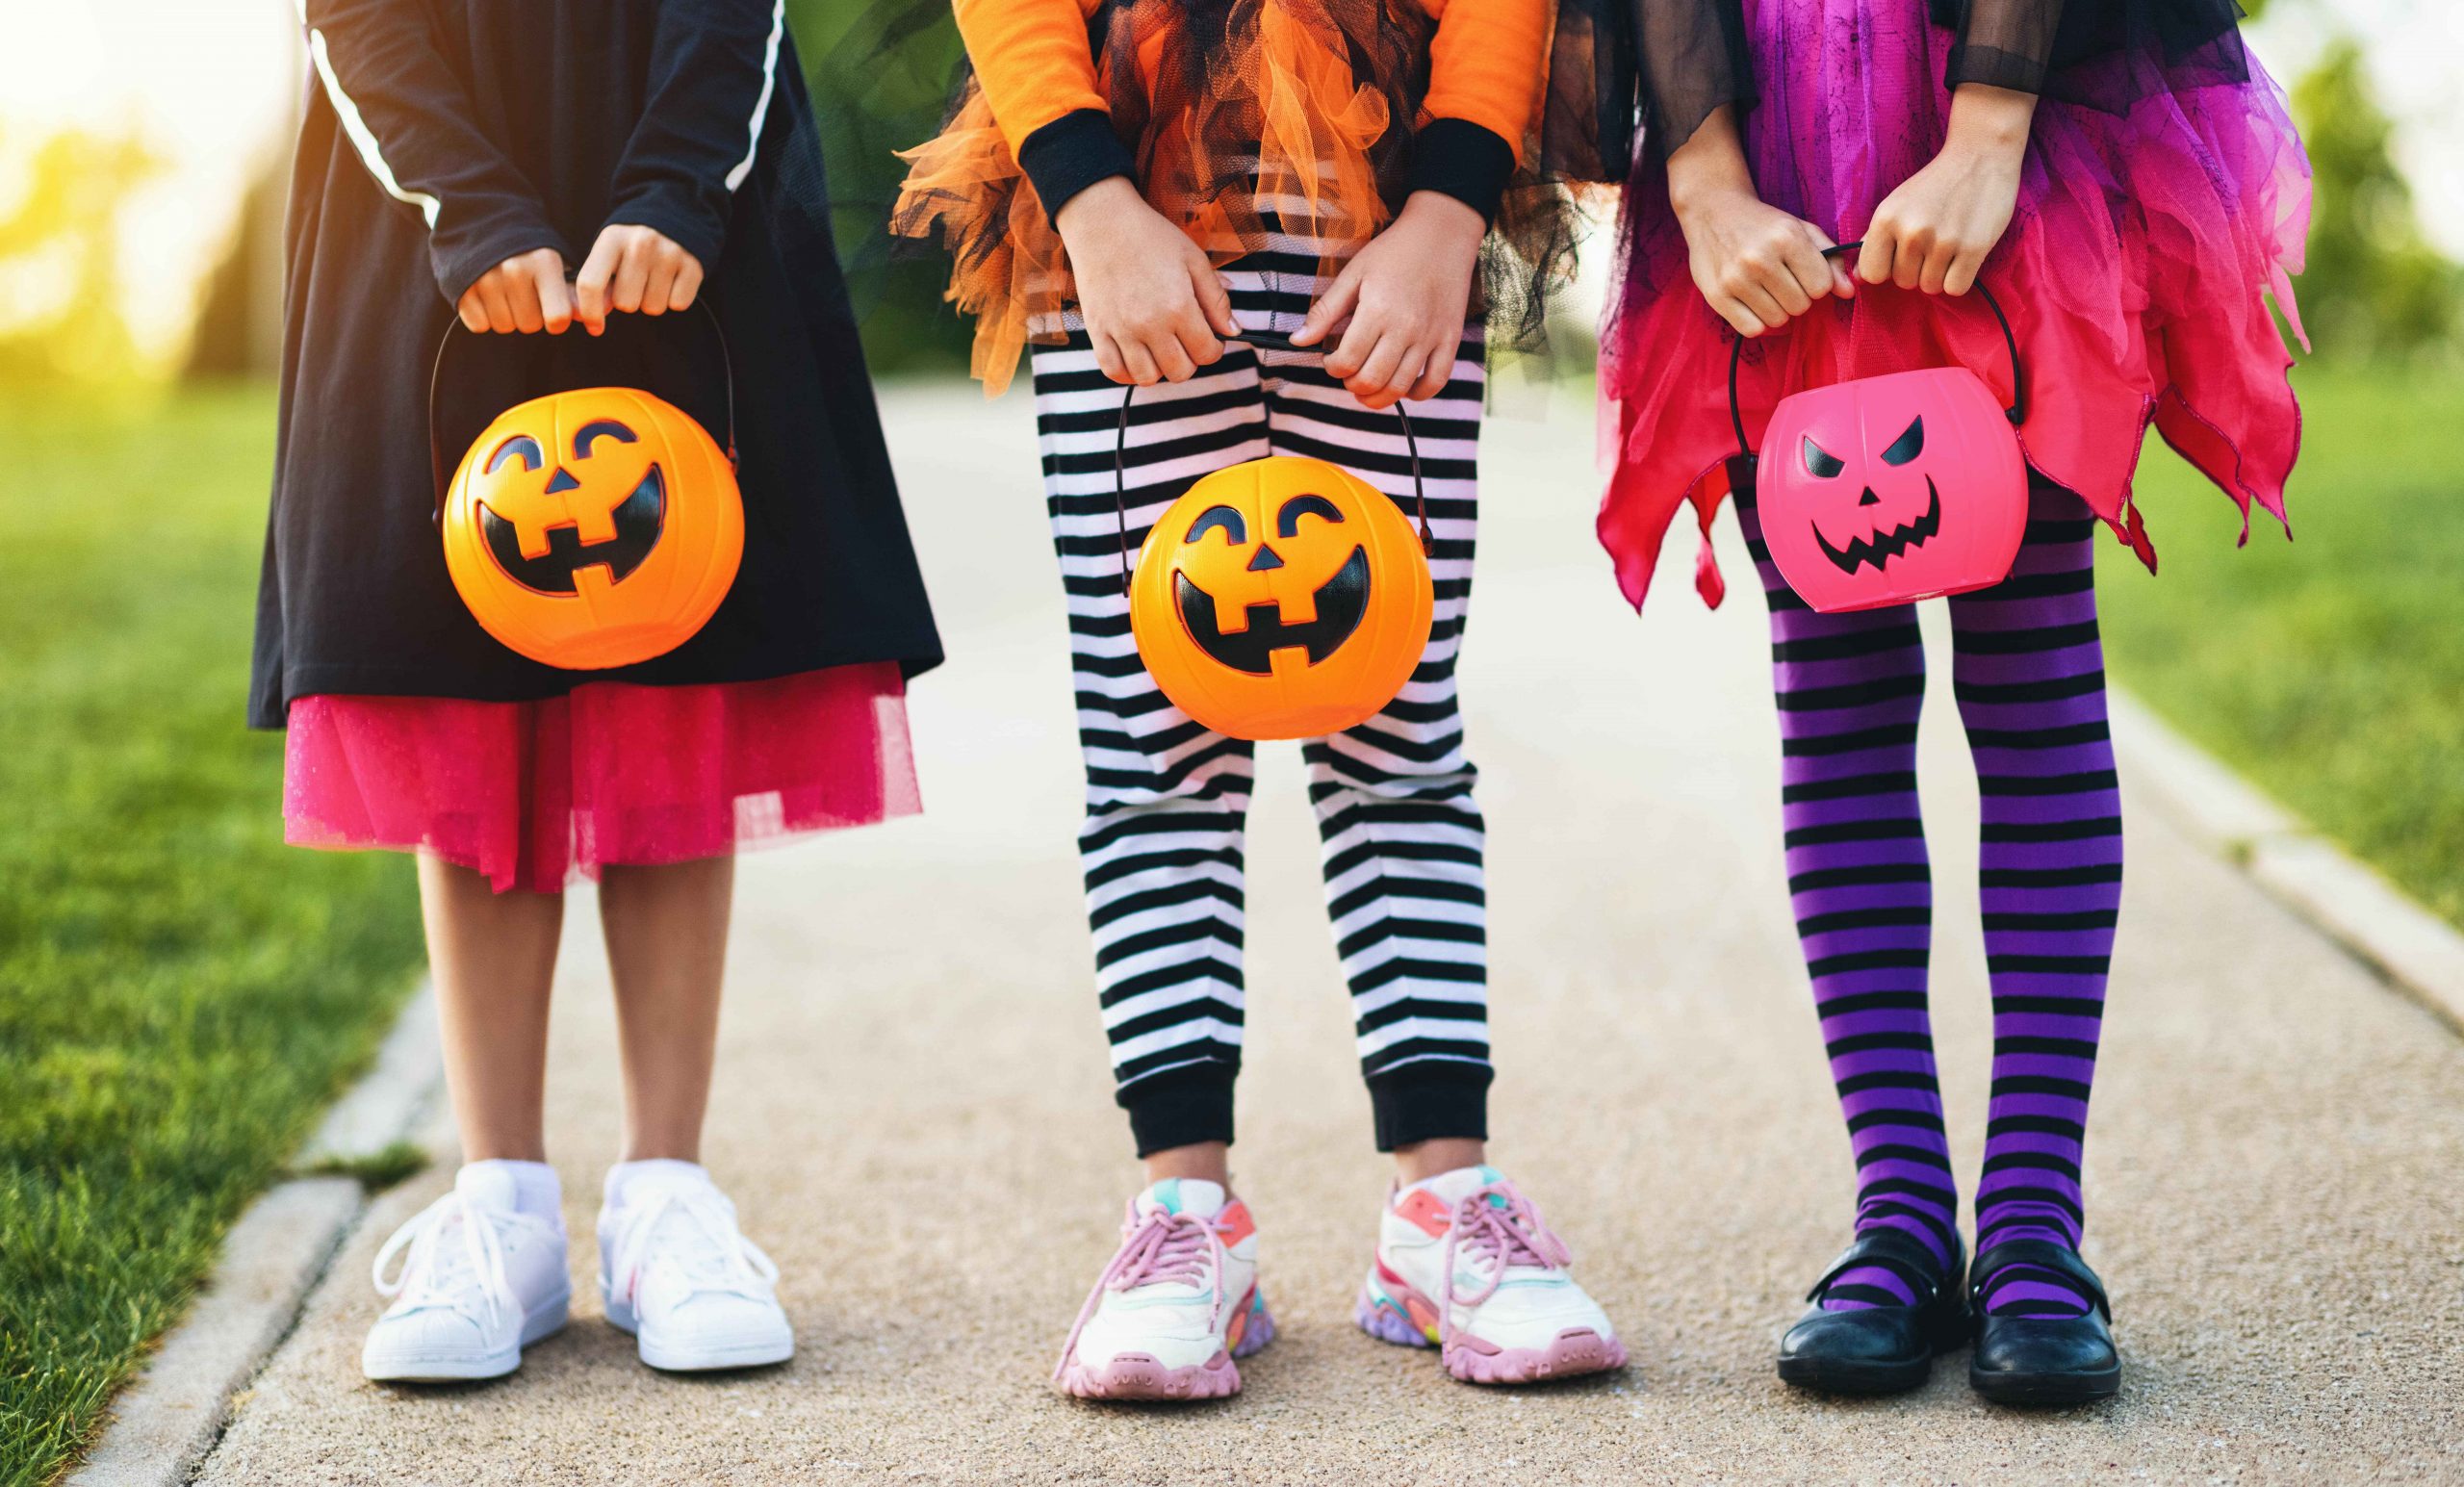 Halloween Safety Tips to Keep Your Family Safe | MomDocs